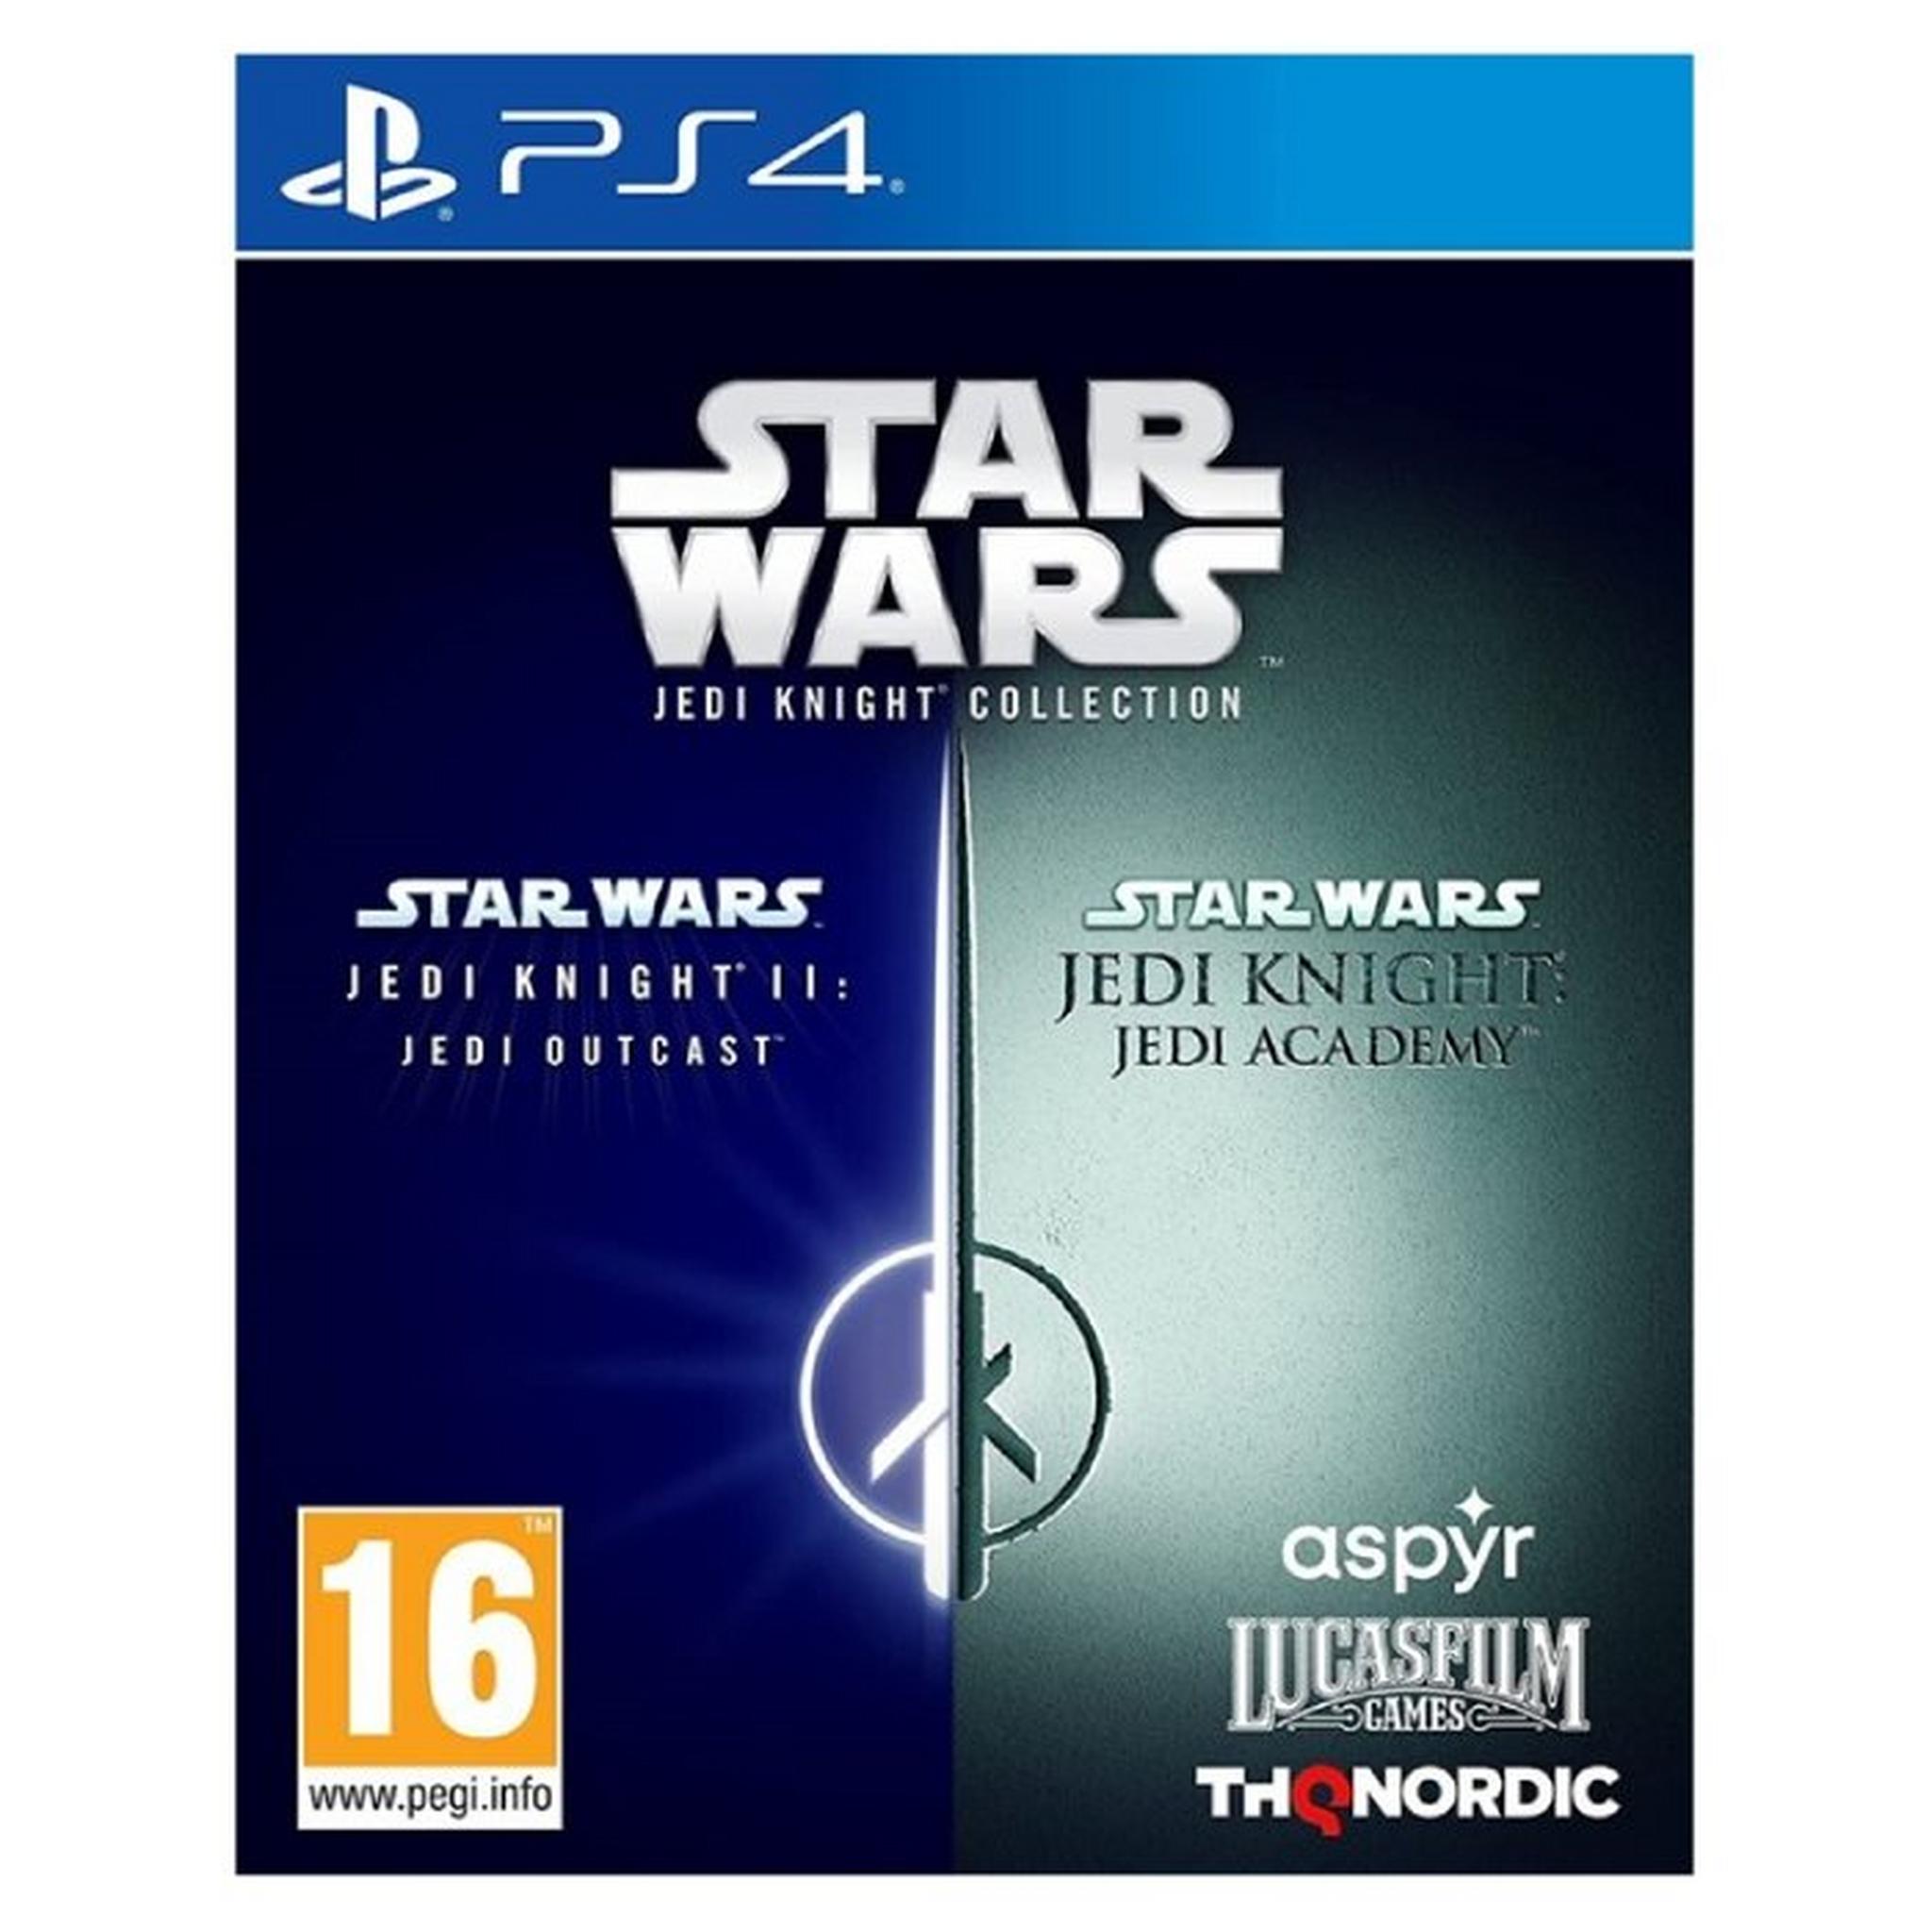 Star Wars Jedi Knight Collection - PS4 Game